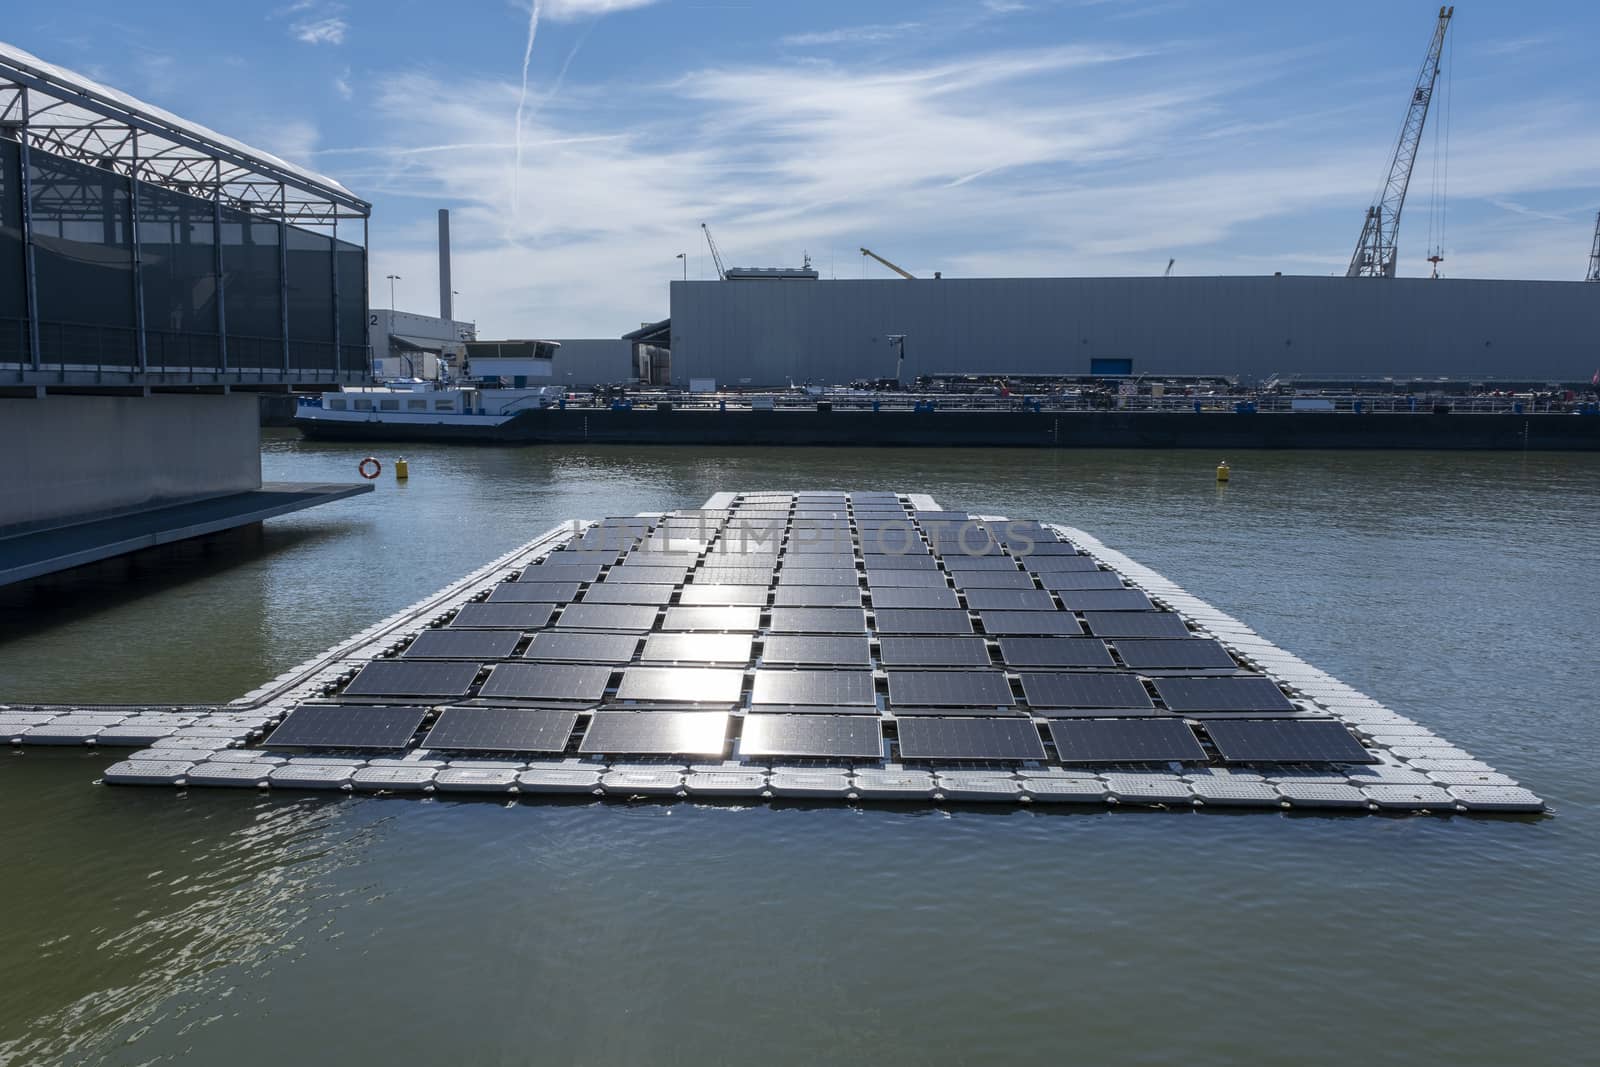 solar panel Floating on the water. Used to produce electricity in a clean technology concept by Tjeerdkruse